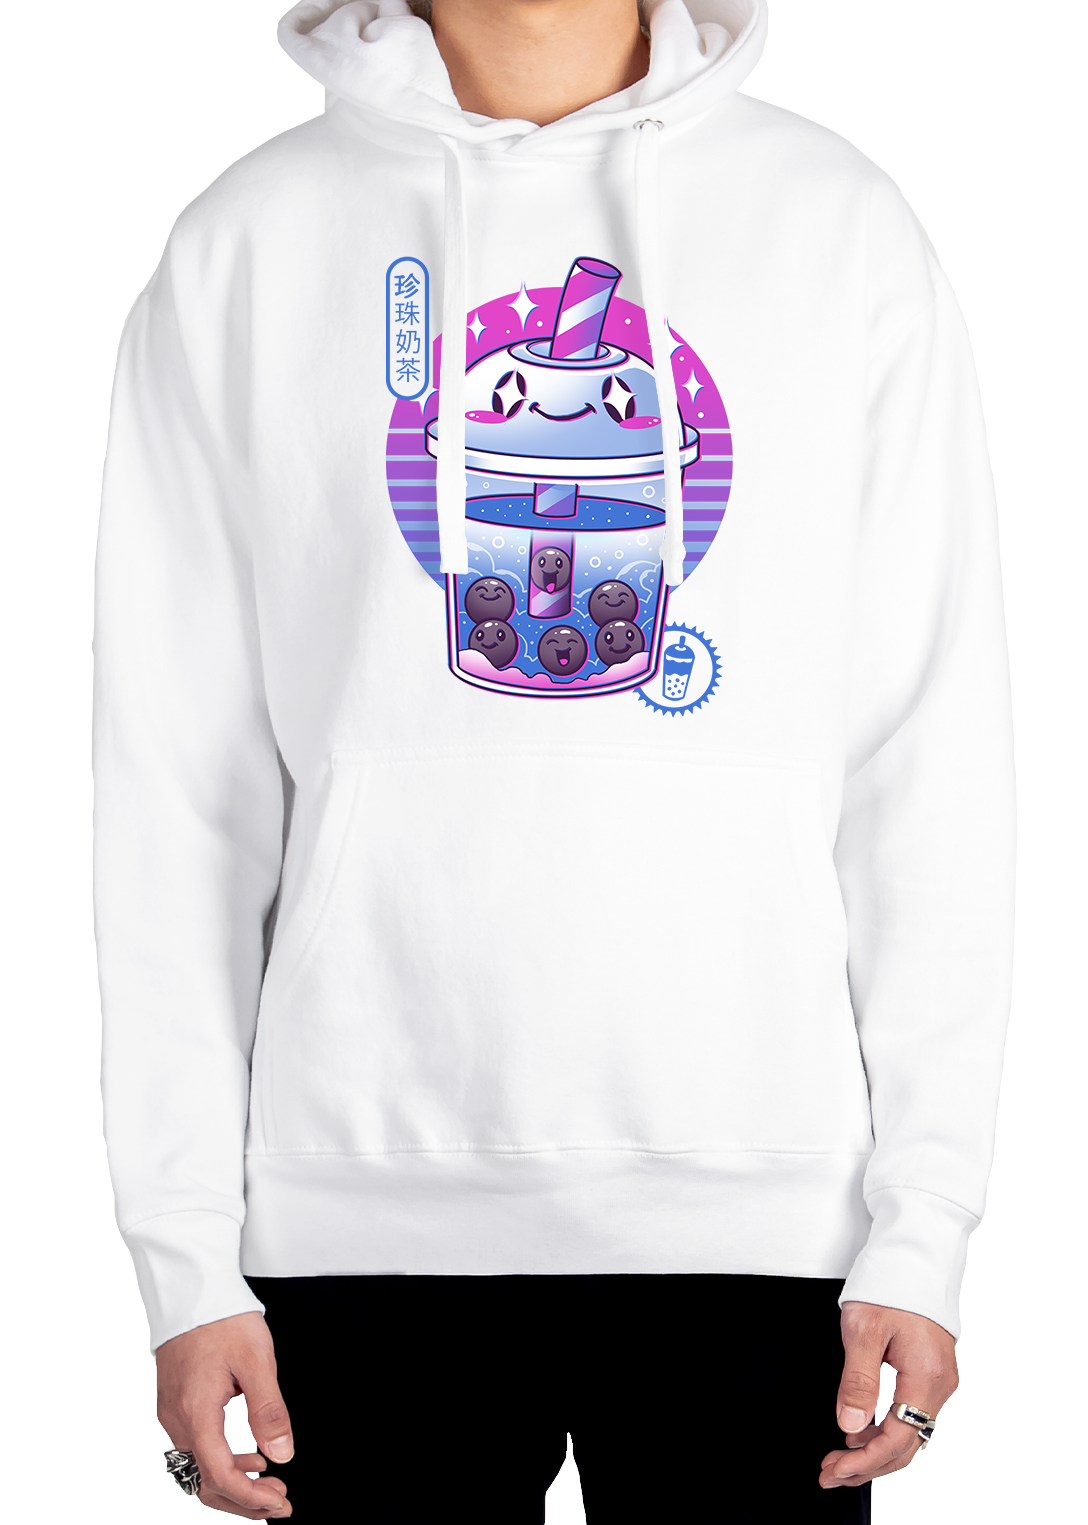 It's Boba Time Hoodie